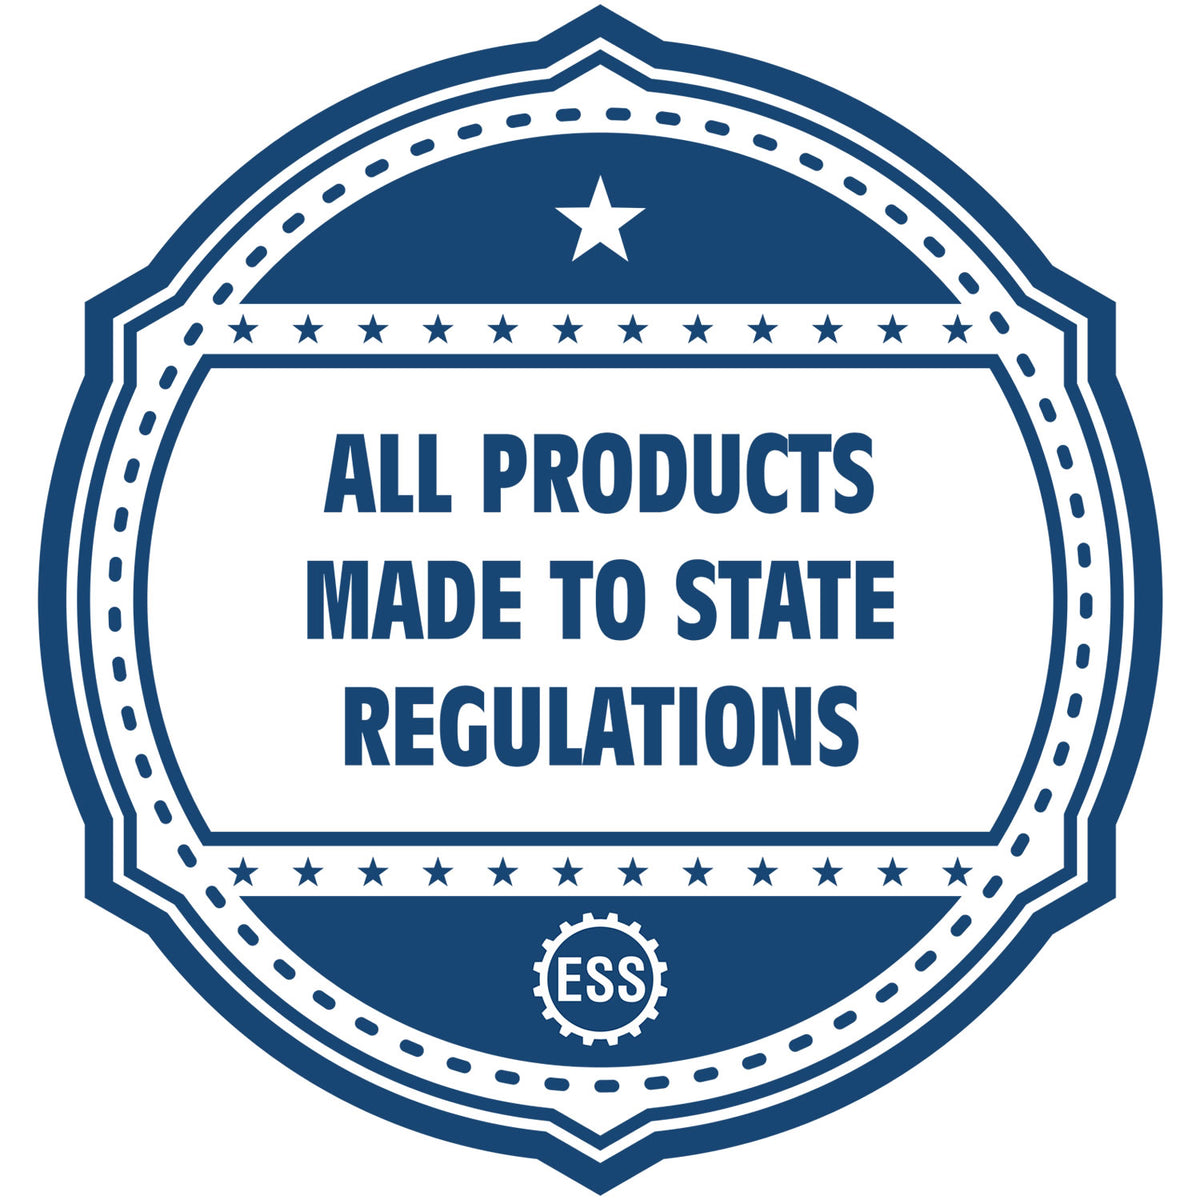 An icon or badge element for the MaxLight Premium Pre-Inked Michigan State Seal Notarial Stamp showing that this product is made in compliance with state regulations.